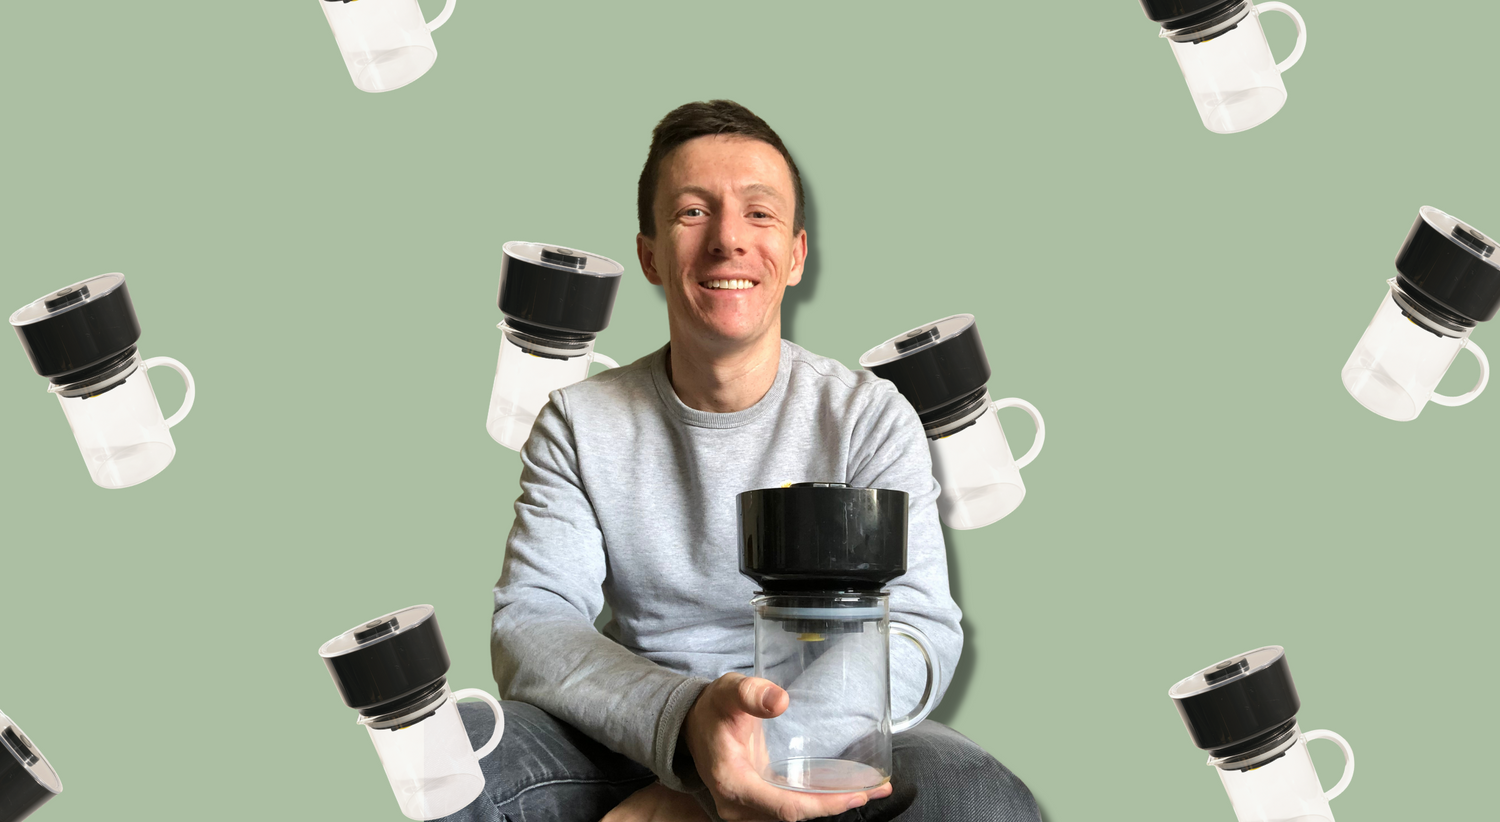 Four-time World Barista Championship finalist Ben Put with the VacOne Air Brewer